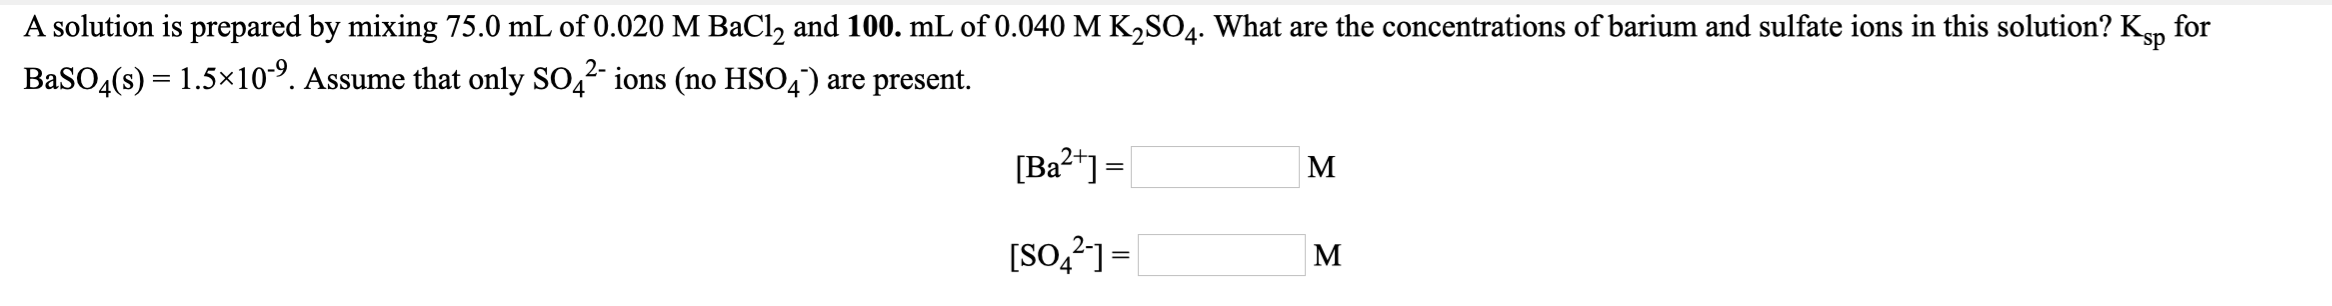 A solution is prepared by mixing 75.0 mL of 0.020 M BaCl, and 100. mL of 0.040 M K,SO4. What are the concentrations of barium and sulfate ions in this solution? Kn
BaSO4(s) = 1.5×10. Assume that only SO,2 ions (no HSO4') are present.
for
[Ba2*] =
M
[SO,?]=|
M
